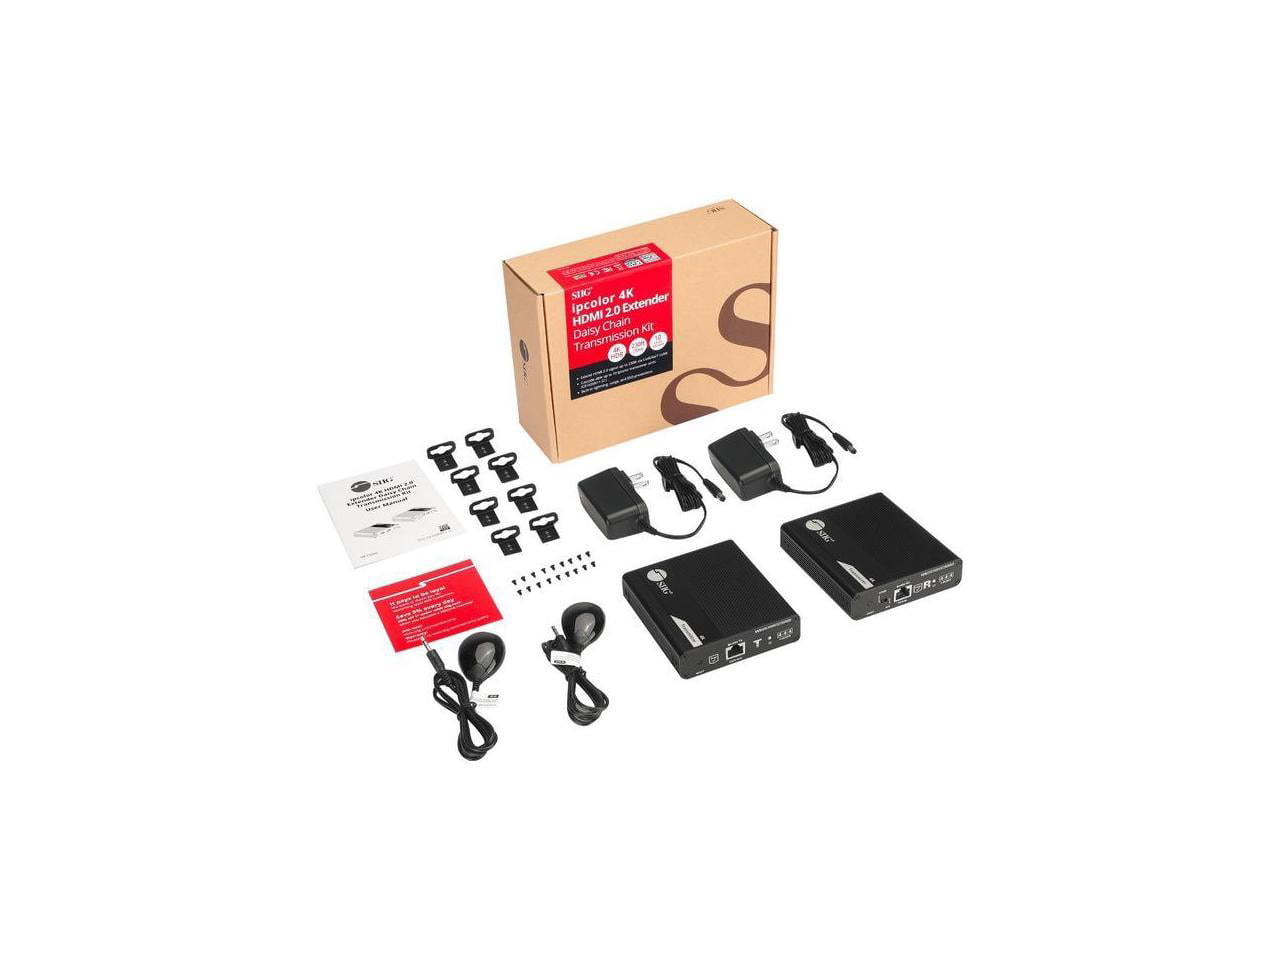 CE-H26M11-S1 4K HDMI Extender Daisy Chain Transmission Kit -  Siig